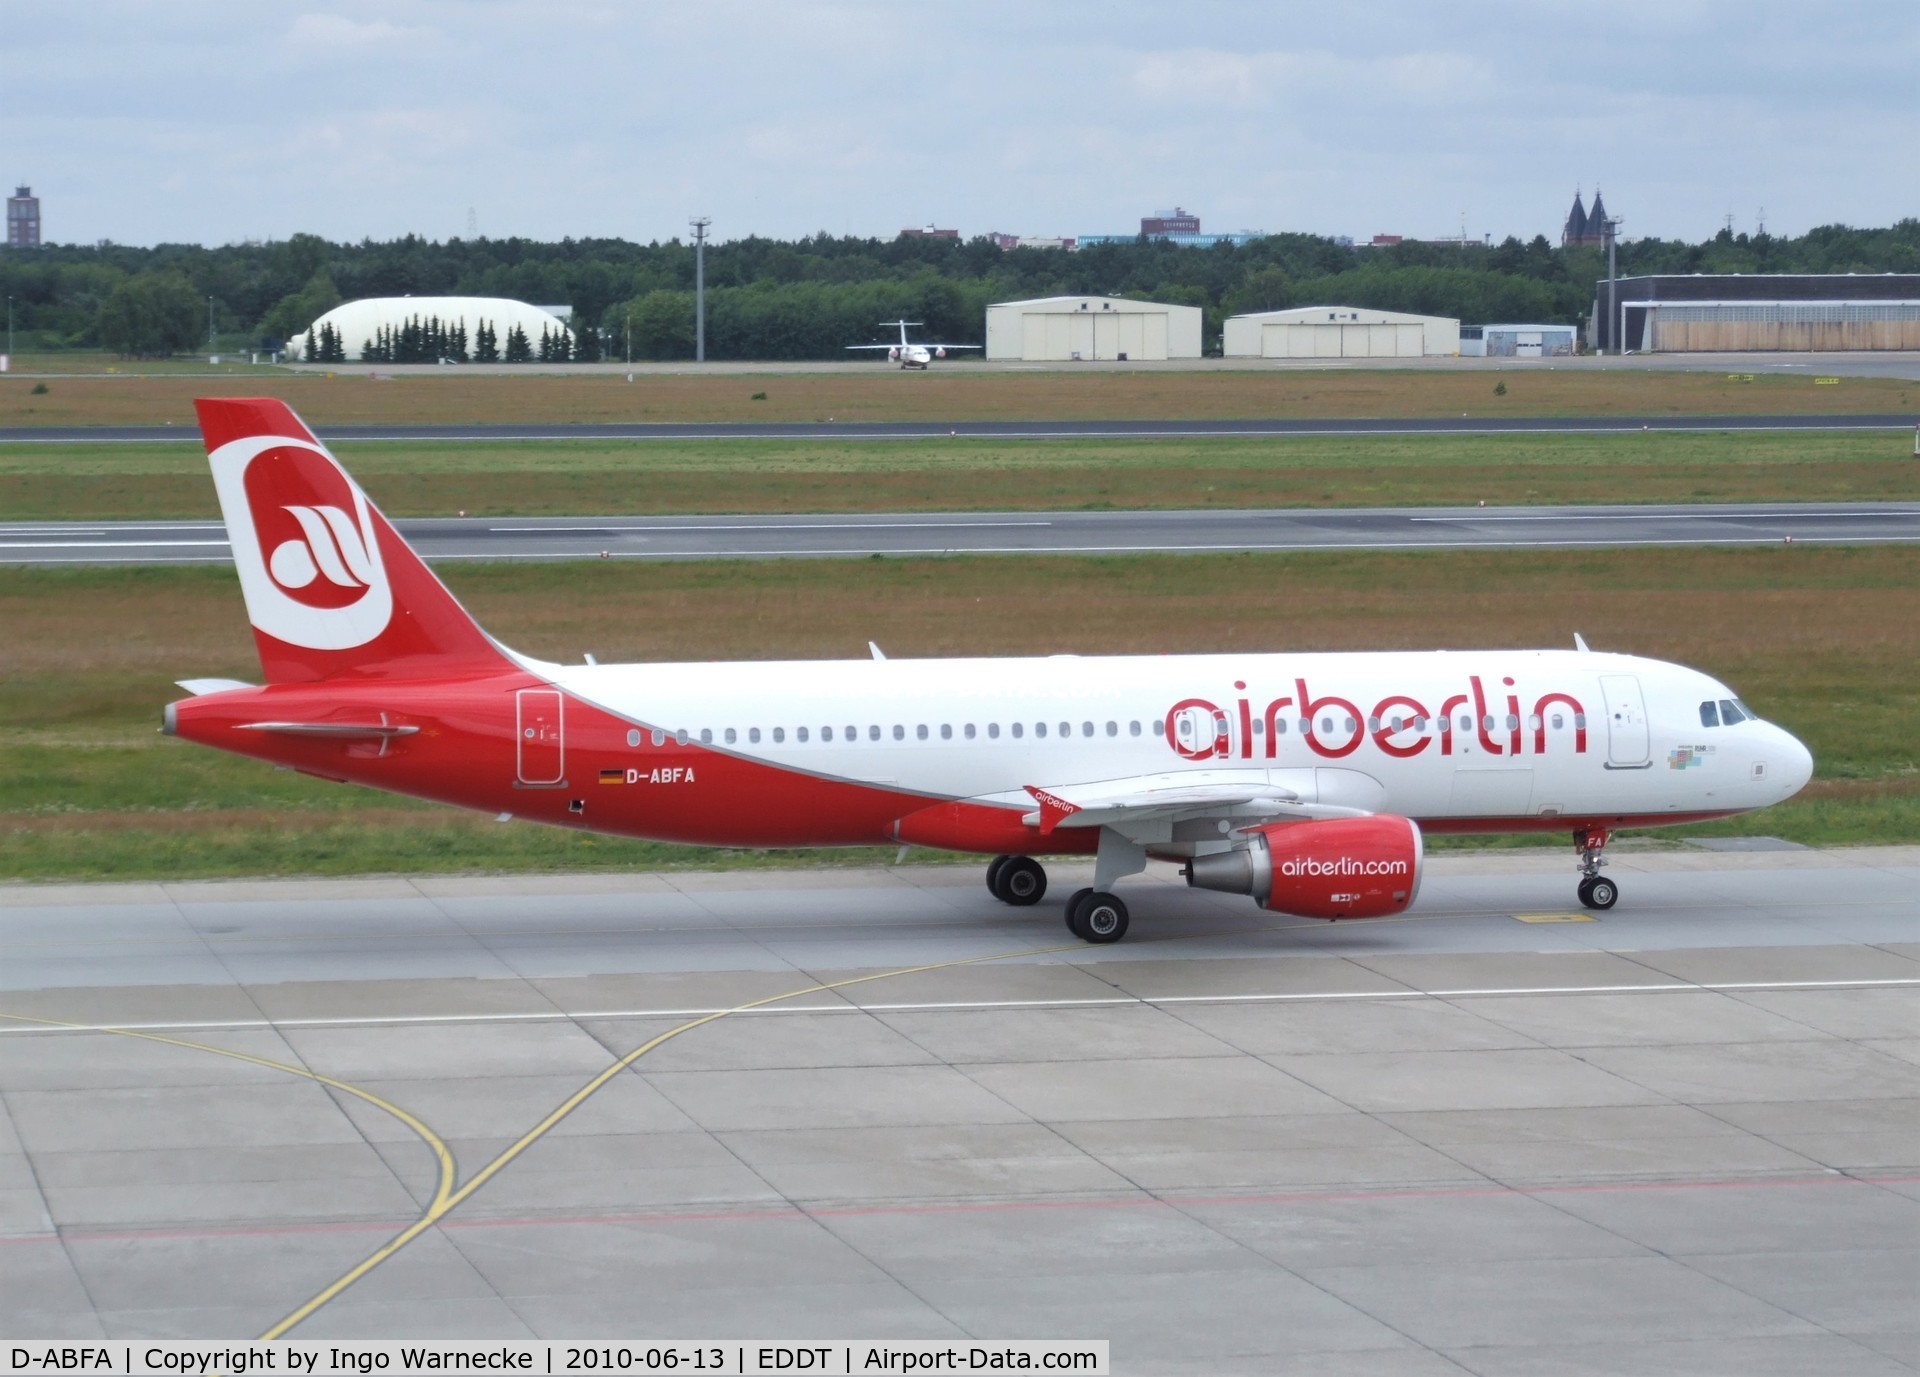 D-ABFA, 2009 Airbus A320-214 C/N 4101, Airbus A320-214 of airberlin at Berlin/Tegel airport